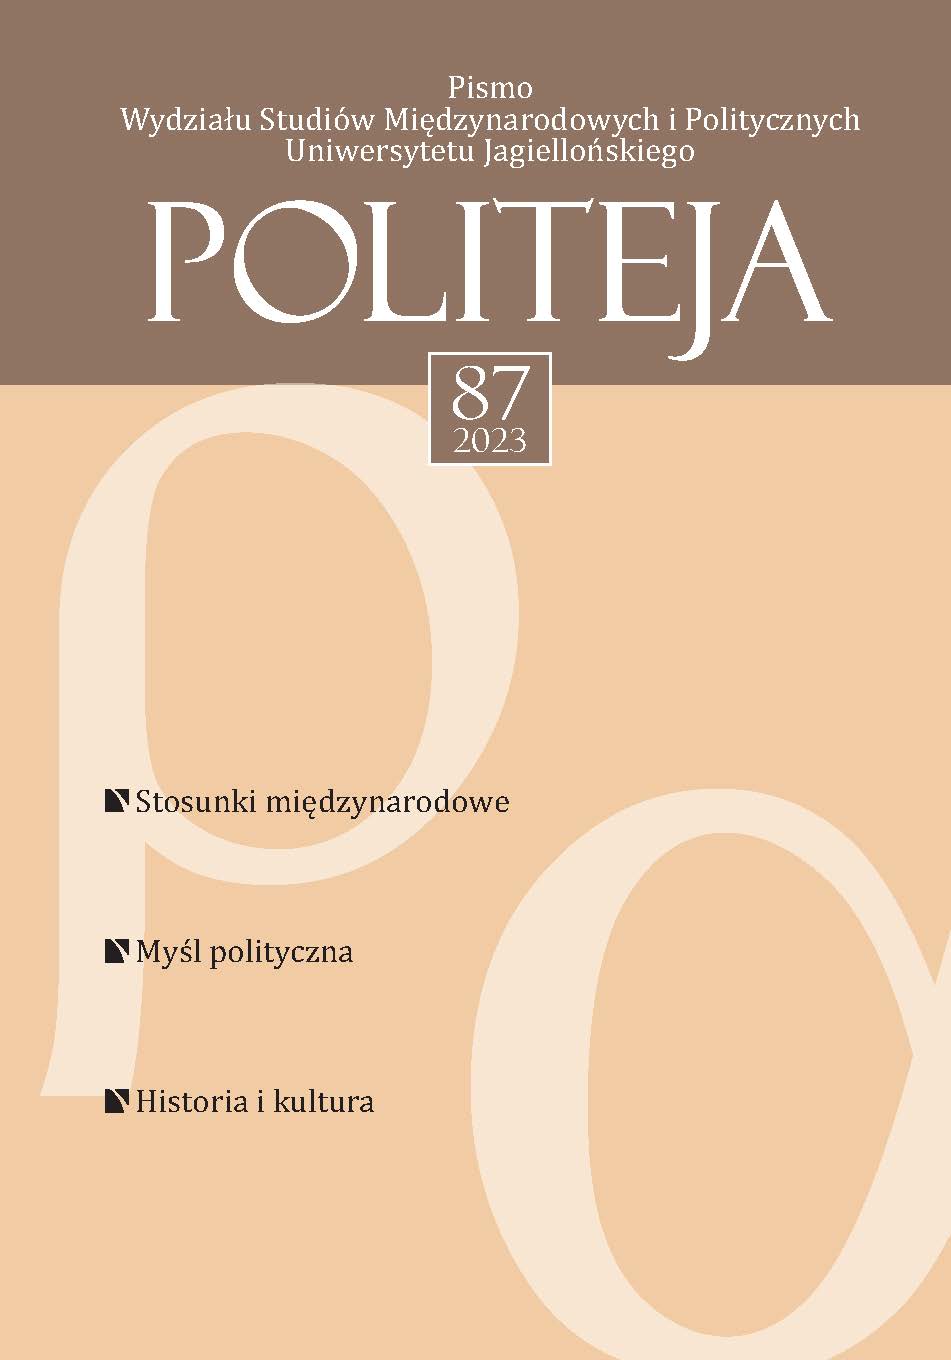 European Heritage Label-based Education as an Essential Part of Memory Education – The Polish Case